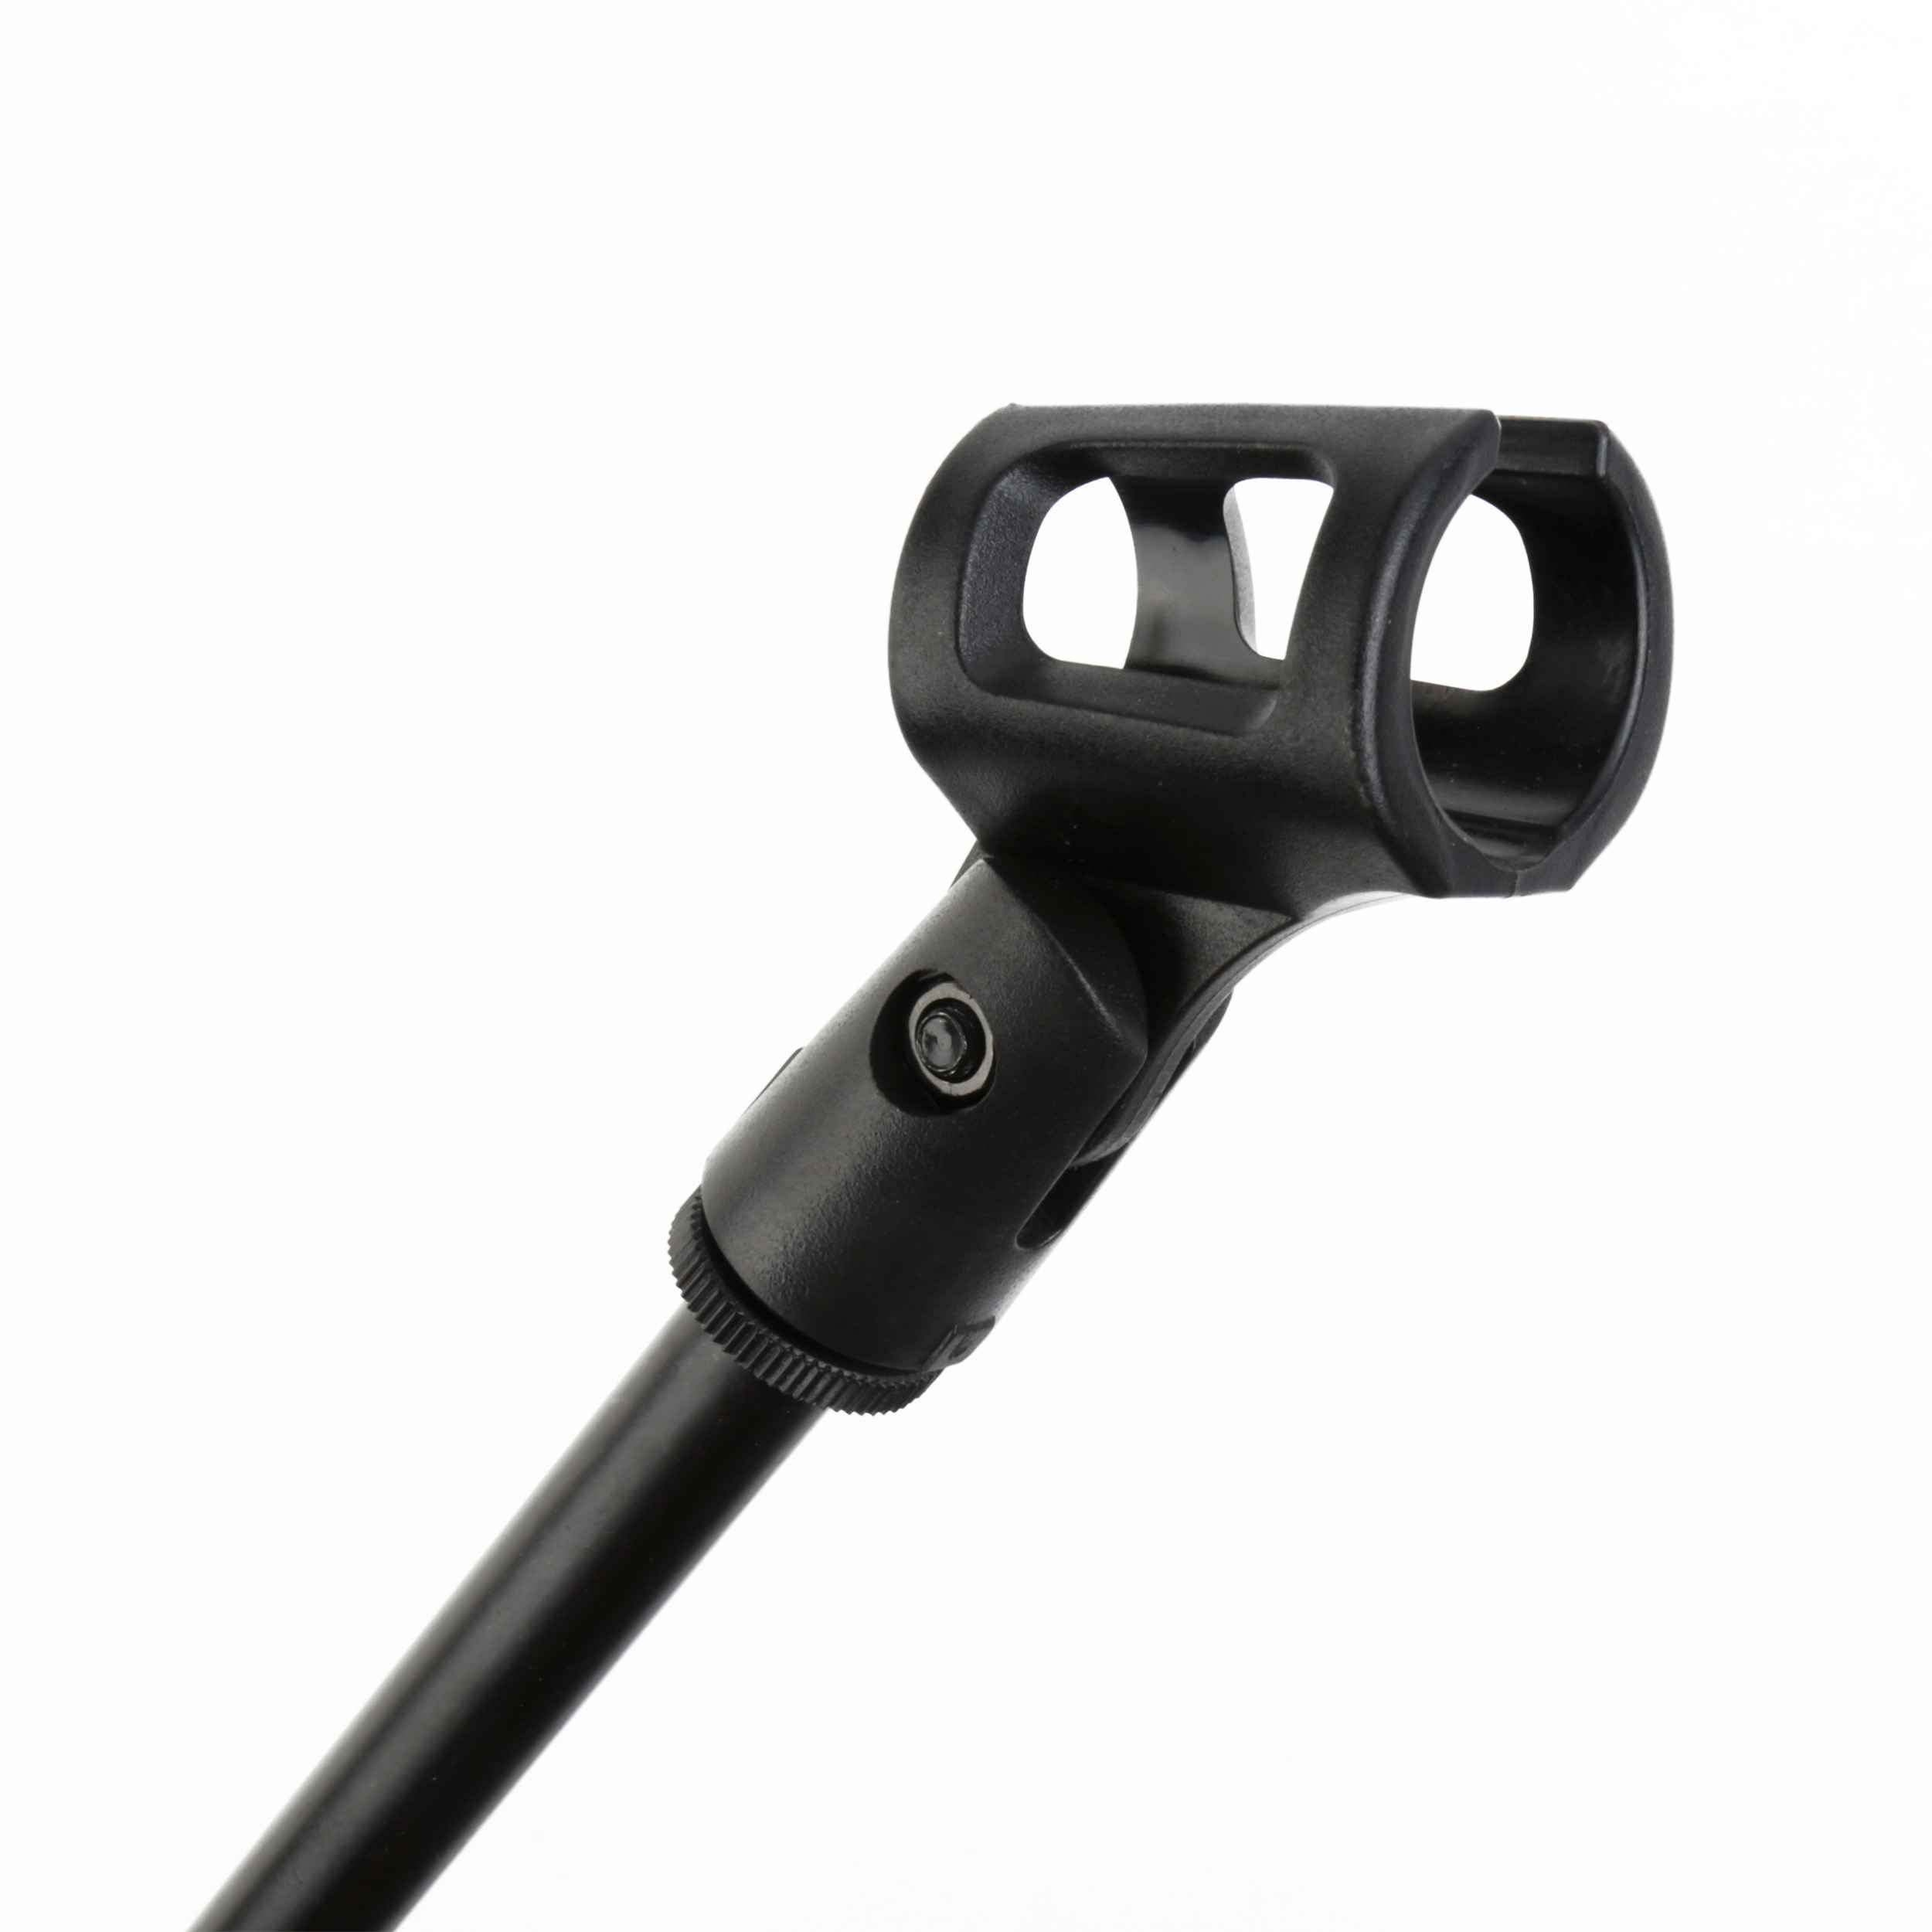 RMS-100 detail Rotosound microphone stand. Black folding metal with clip